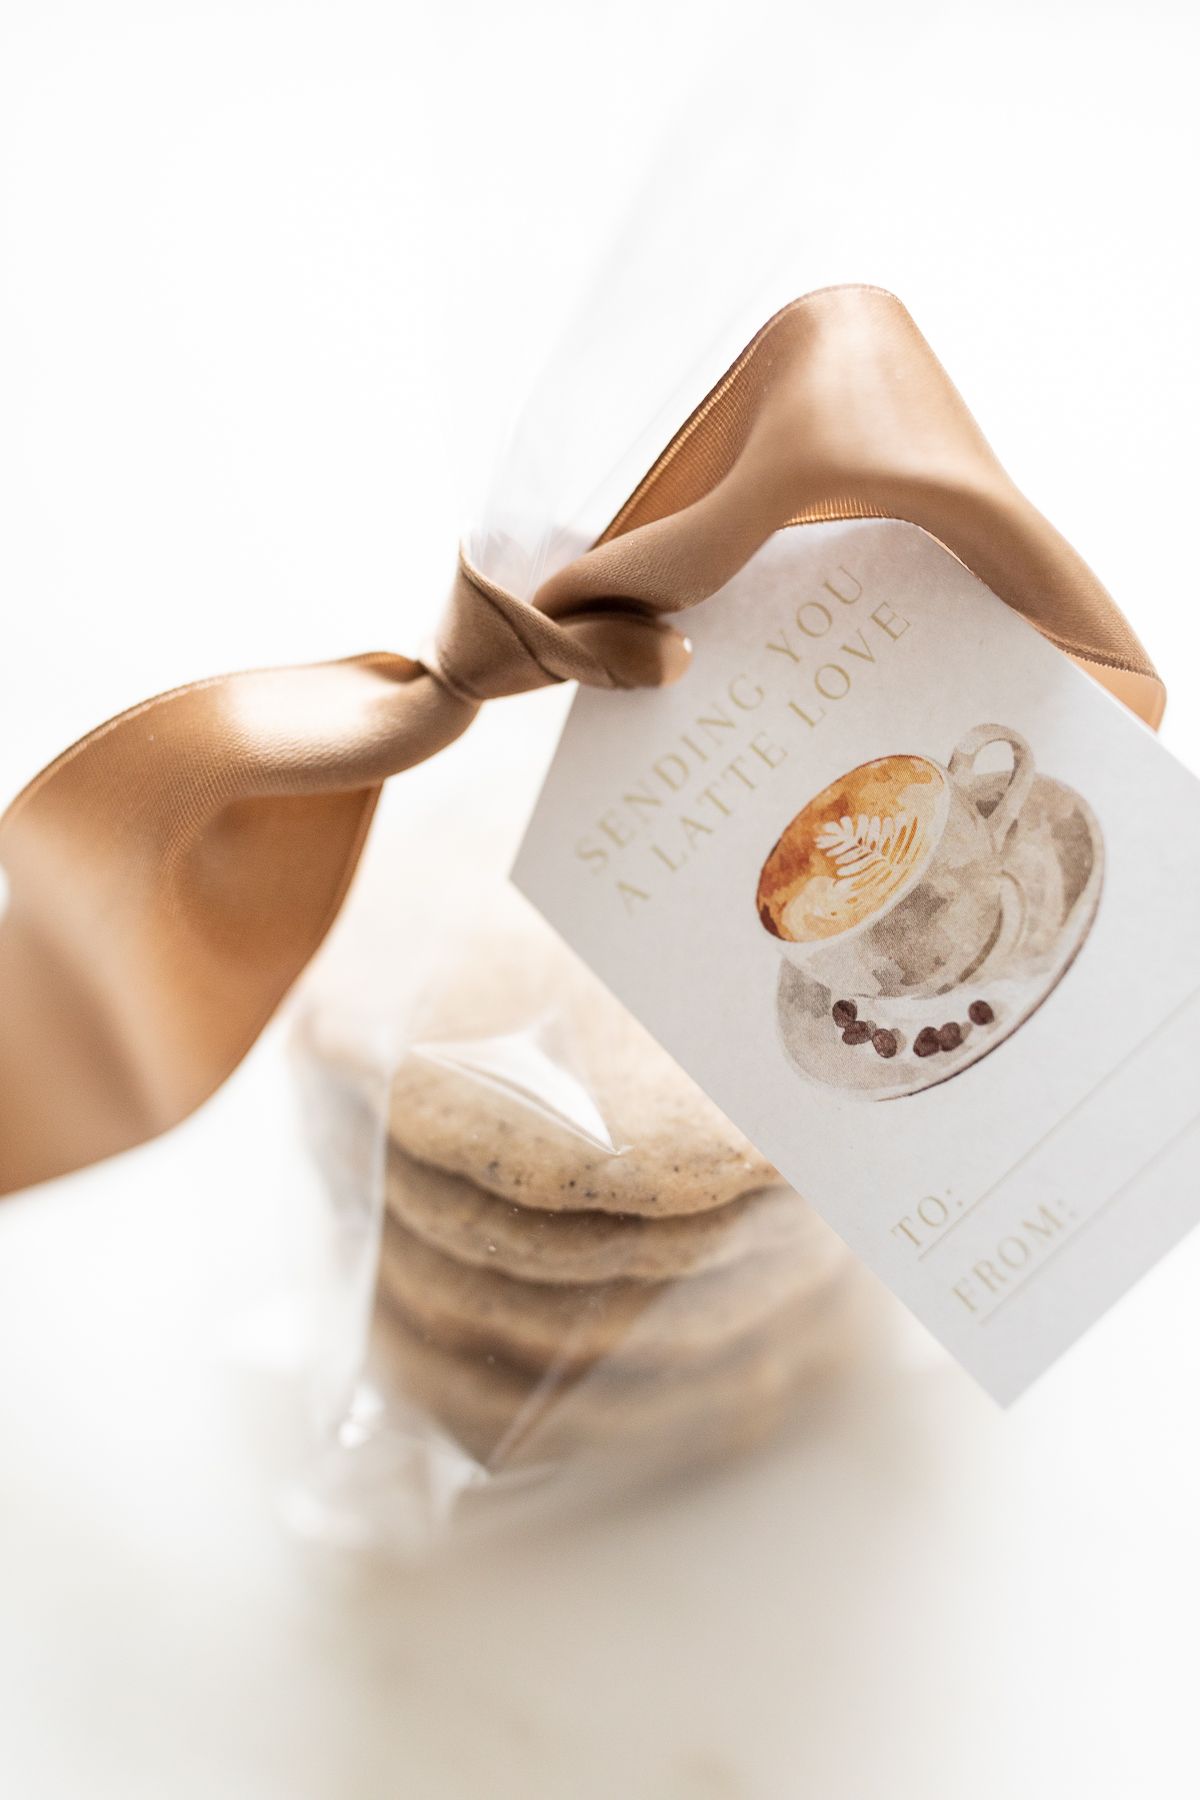 Shortbread Espresso cookies stacked in a clear bag with a tag that reads "thanks a latte"